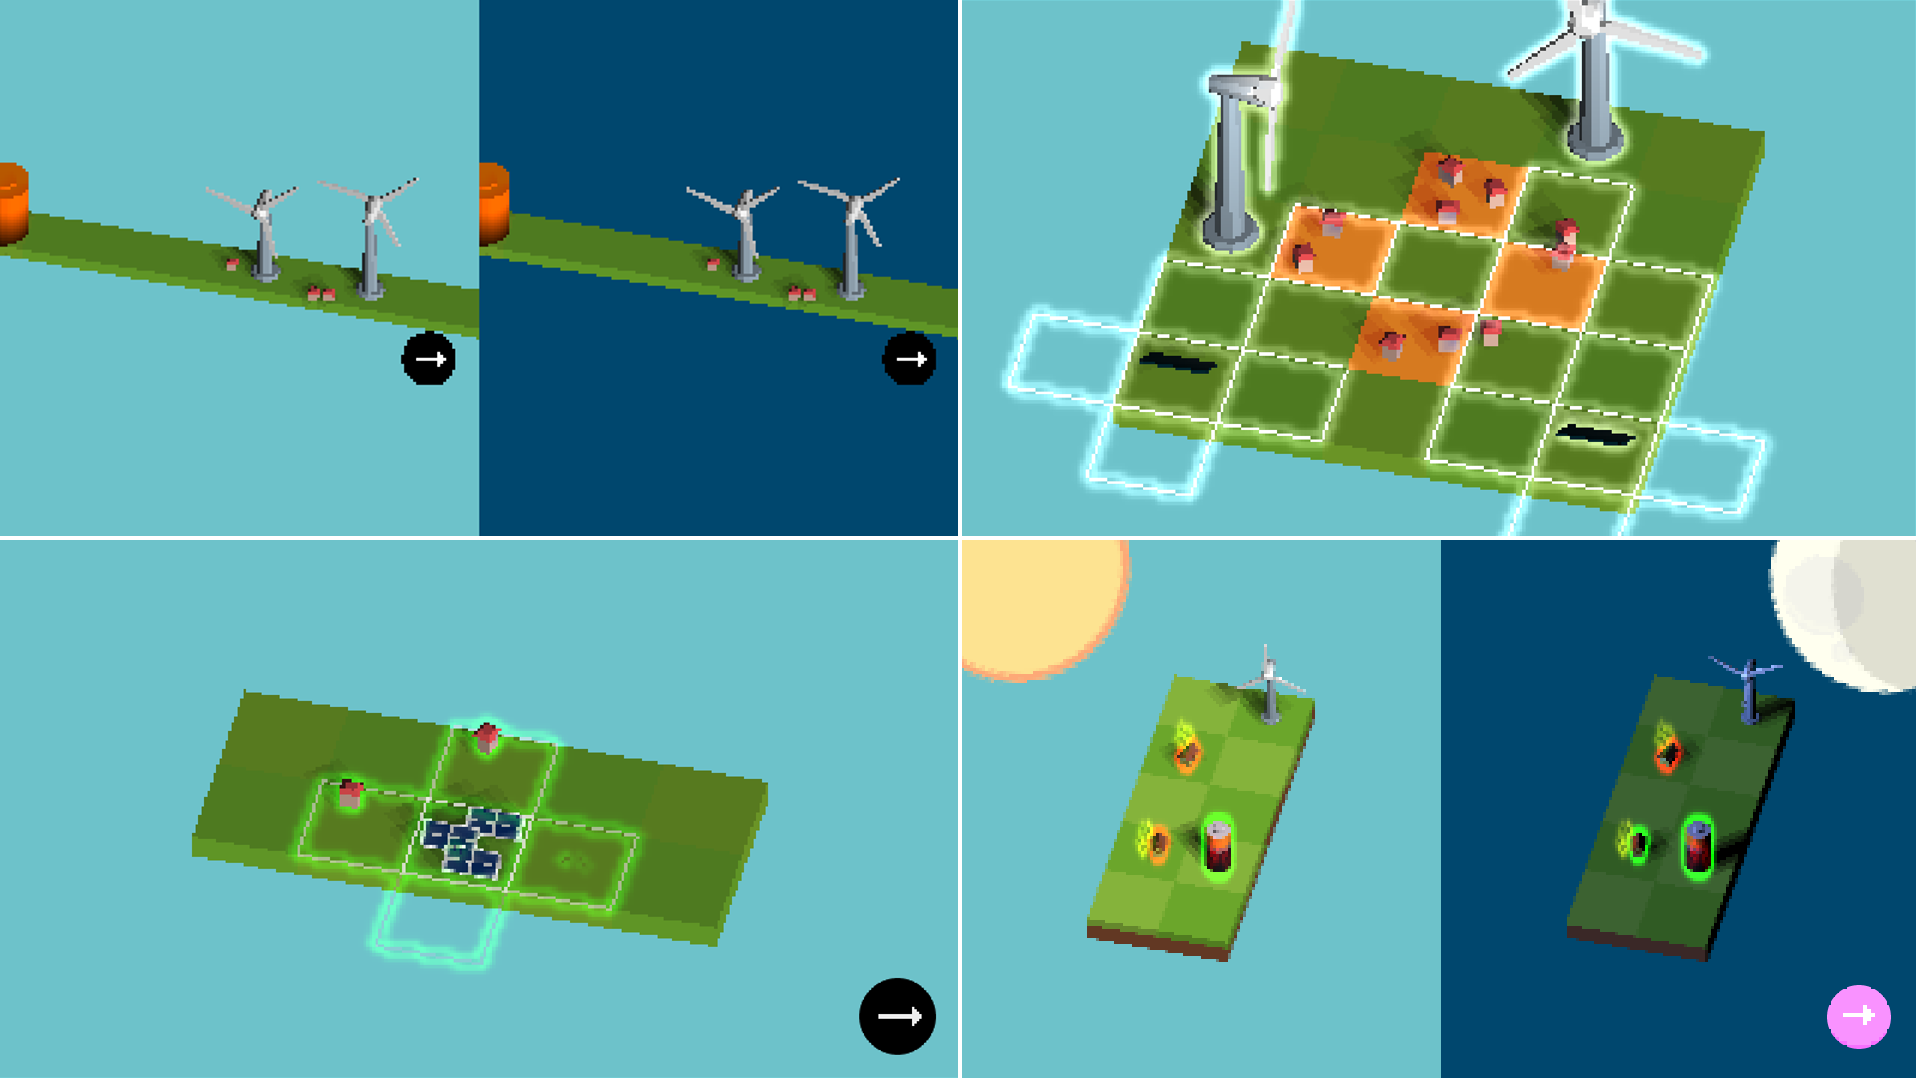 second collage of several iterations of the game visuals